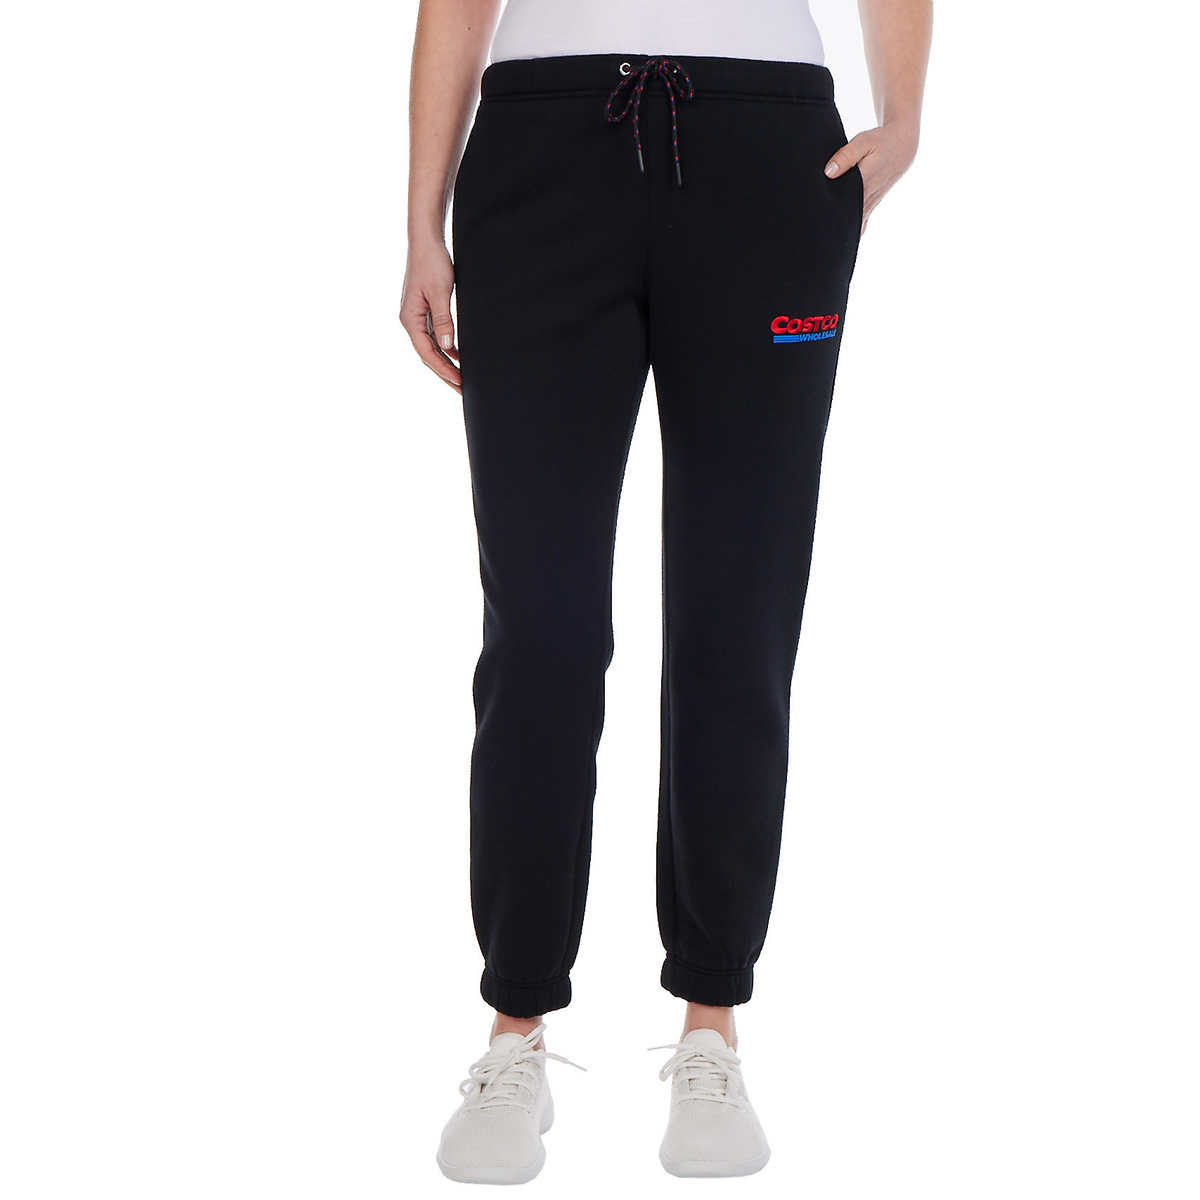 Women's Brand Logo Print Jogger Pant,Grey – All Brands Factory Outlet